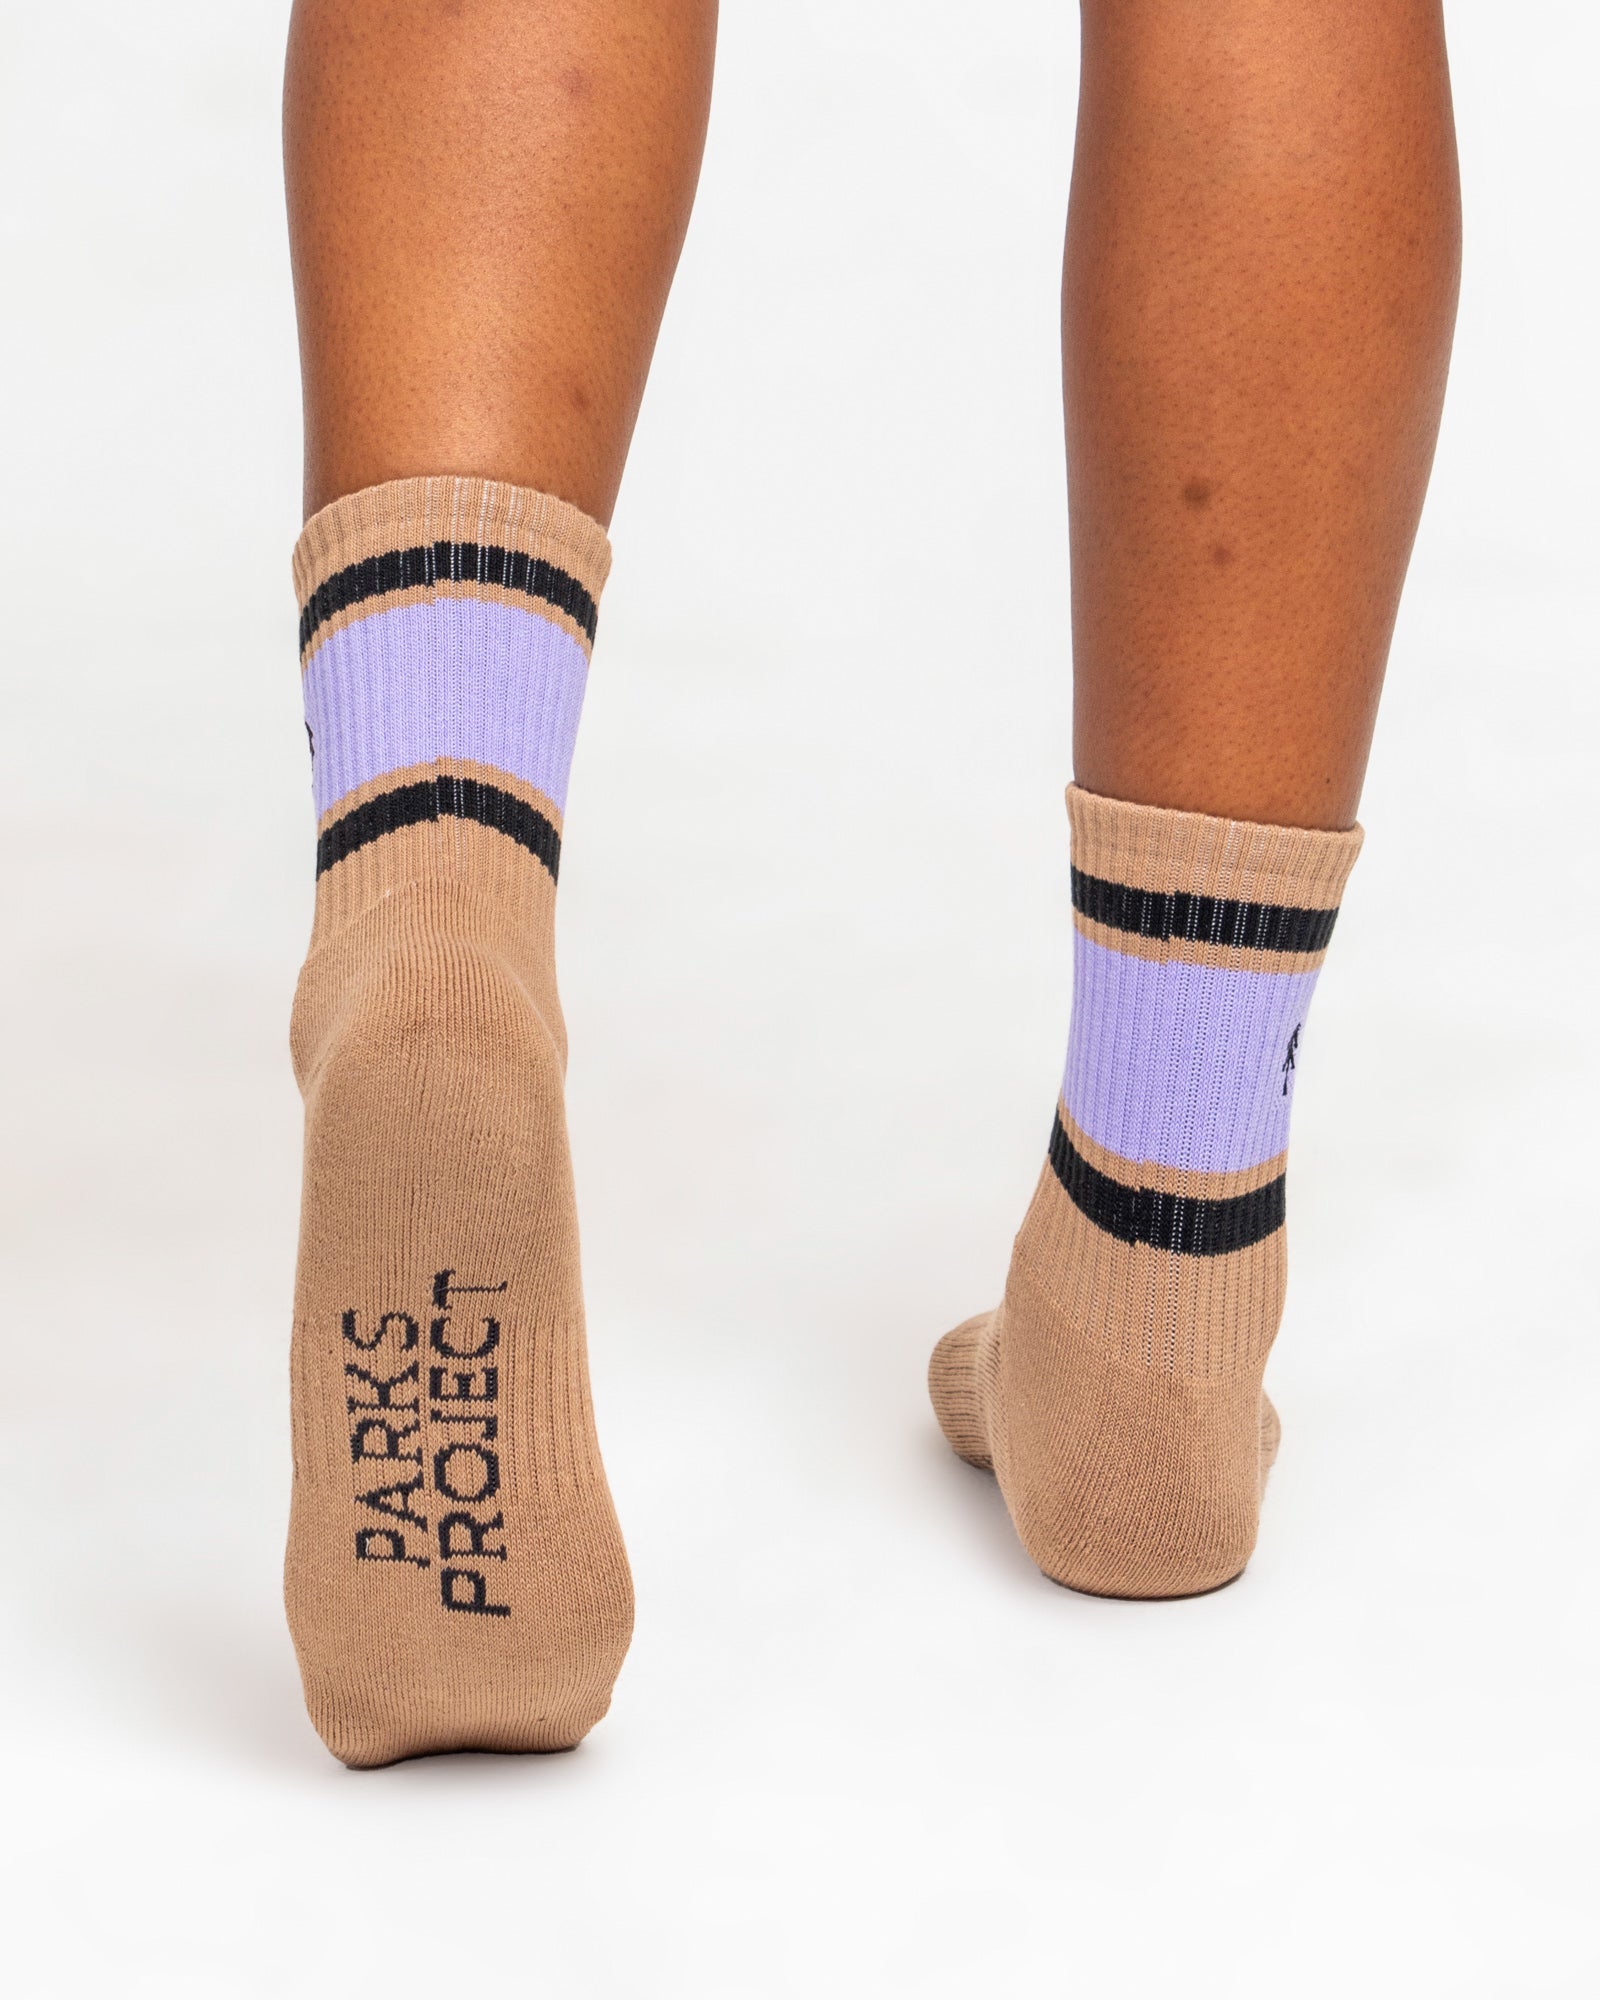 Shop Trail Crew Tube Socks 2 pack Inspired By National Parks – Parks Project